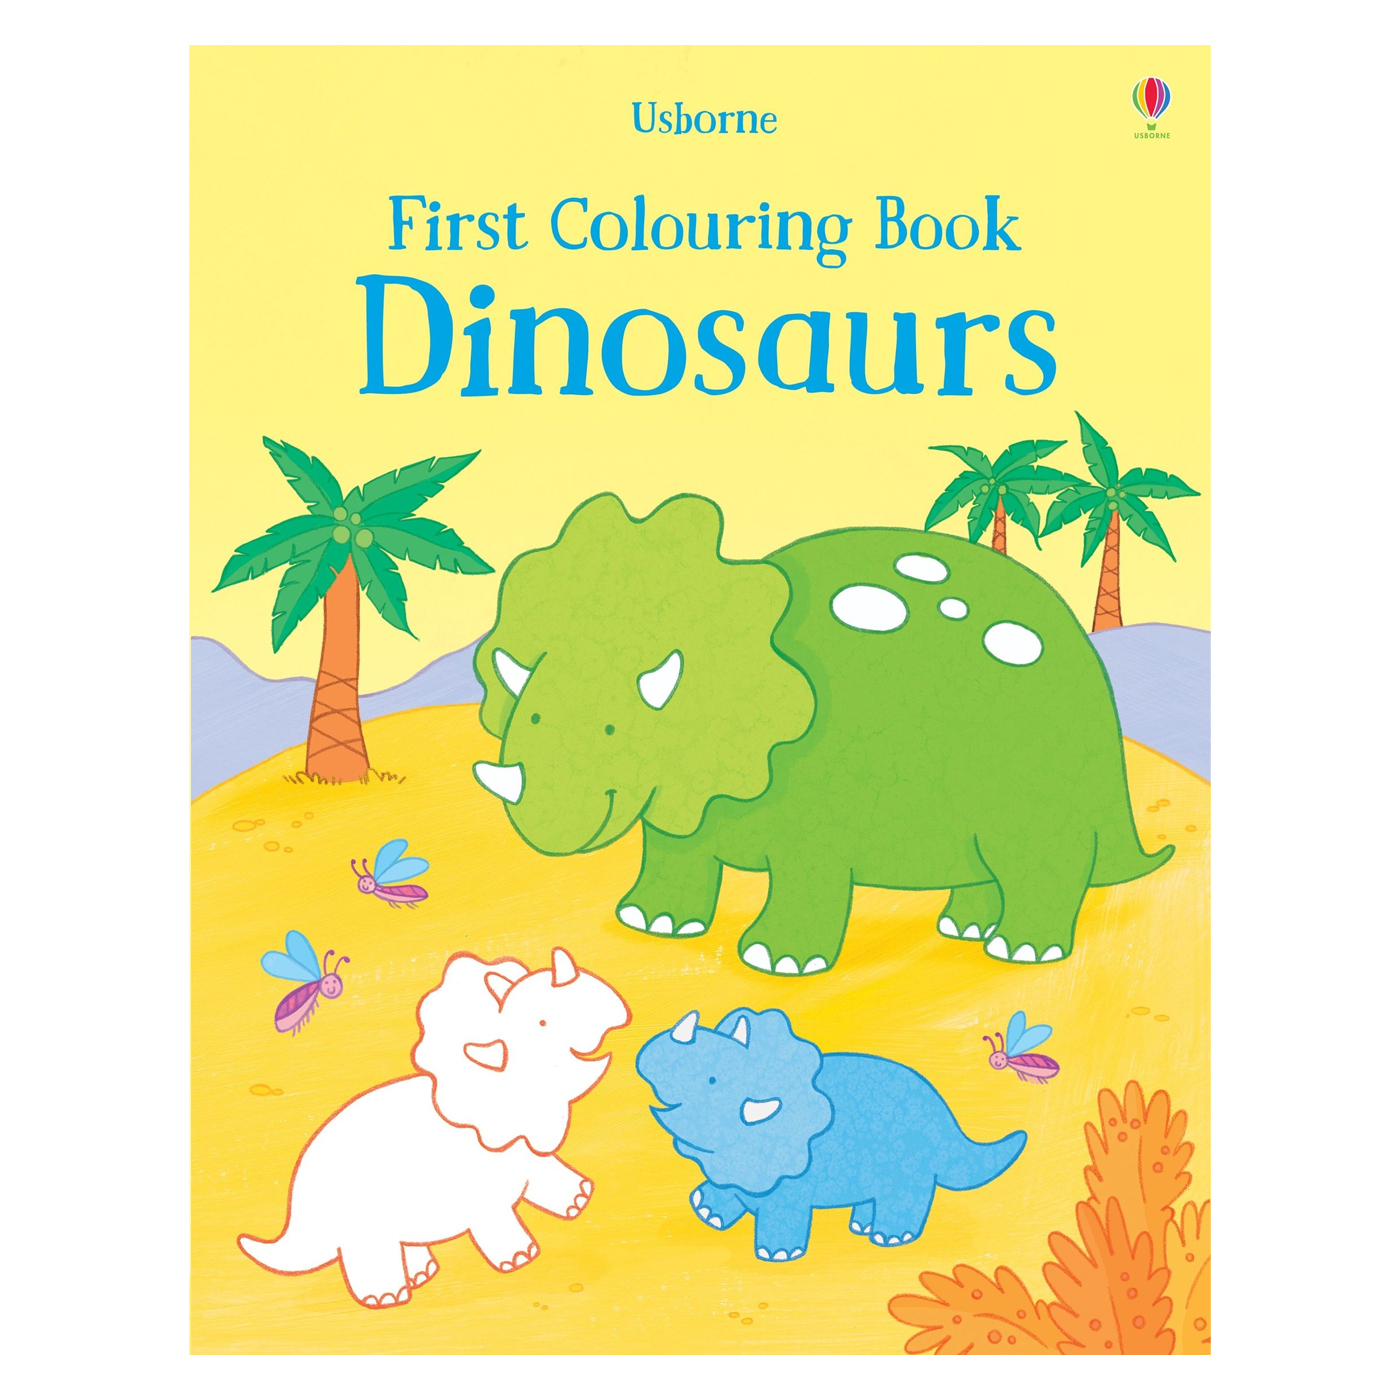  First Colouring Book Dinosaurs